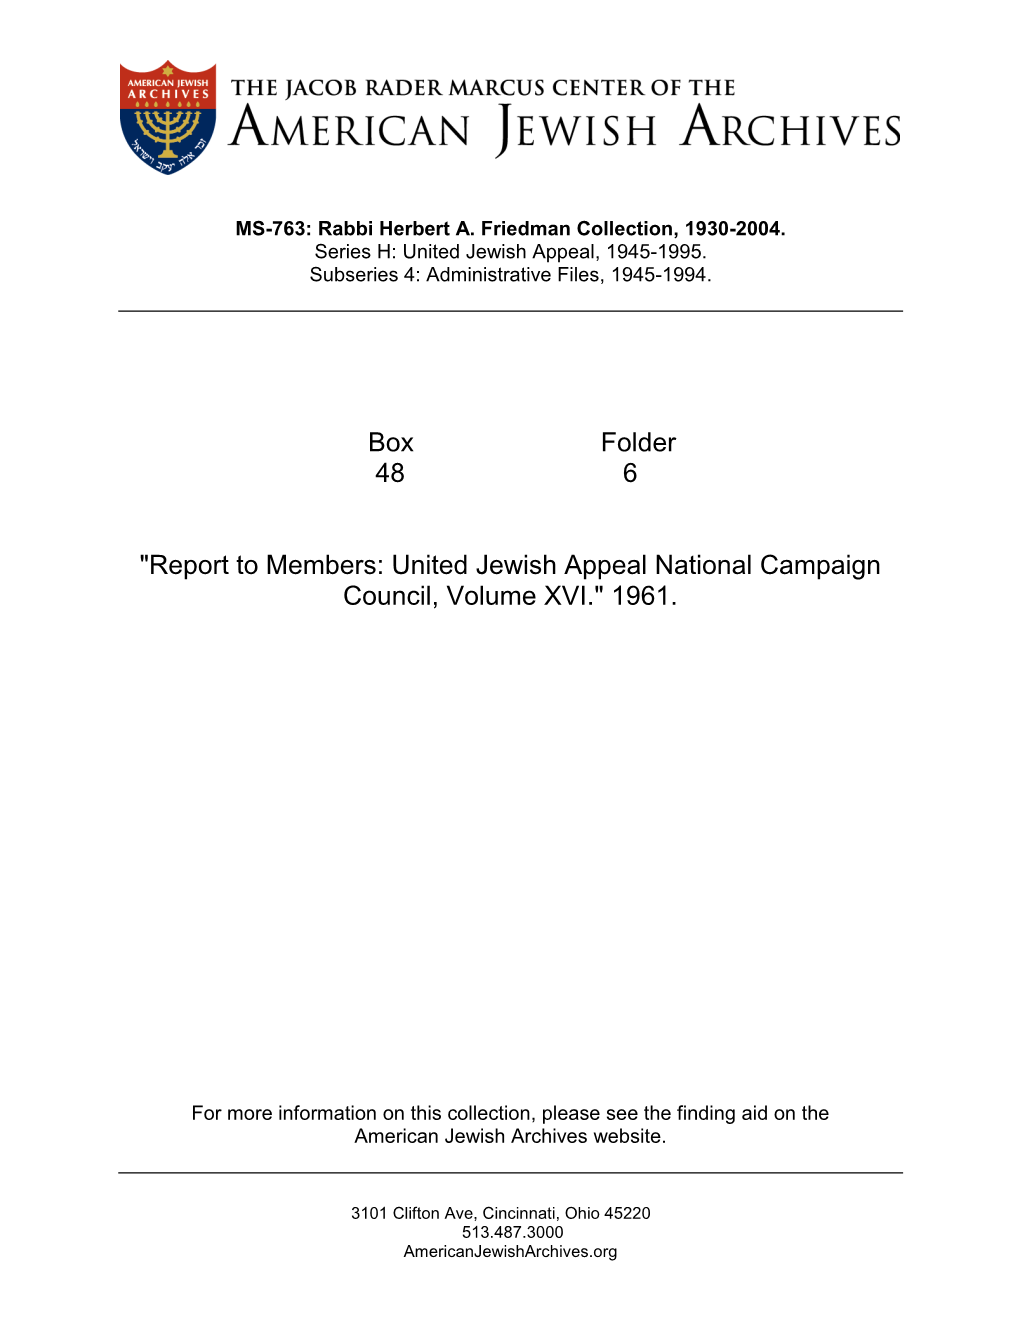 "Report to Members: United Jewish Appeal National Campaign Council, Volume XVI." 1961